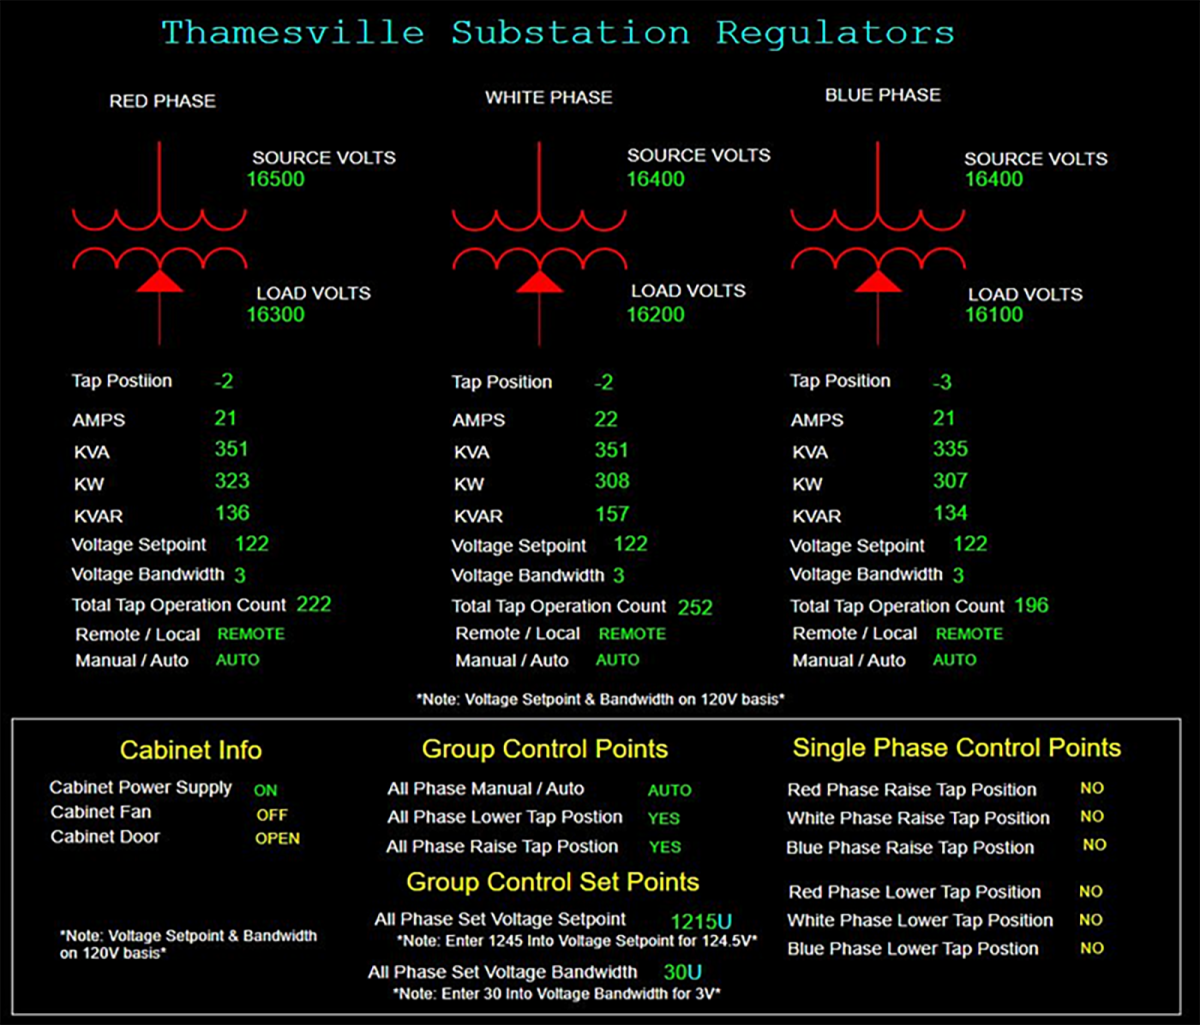 Image Example of the Operator Control and Visualization Dashboard for the Regulator